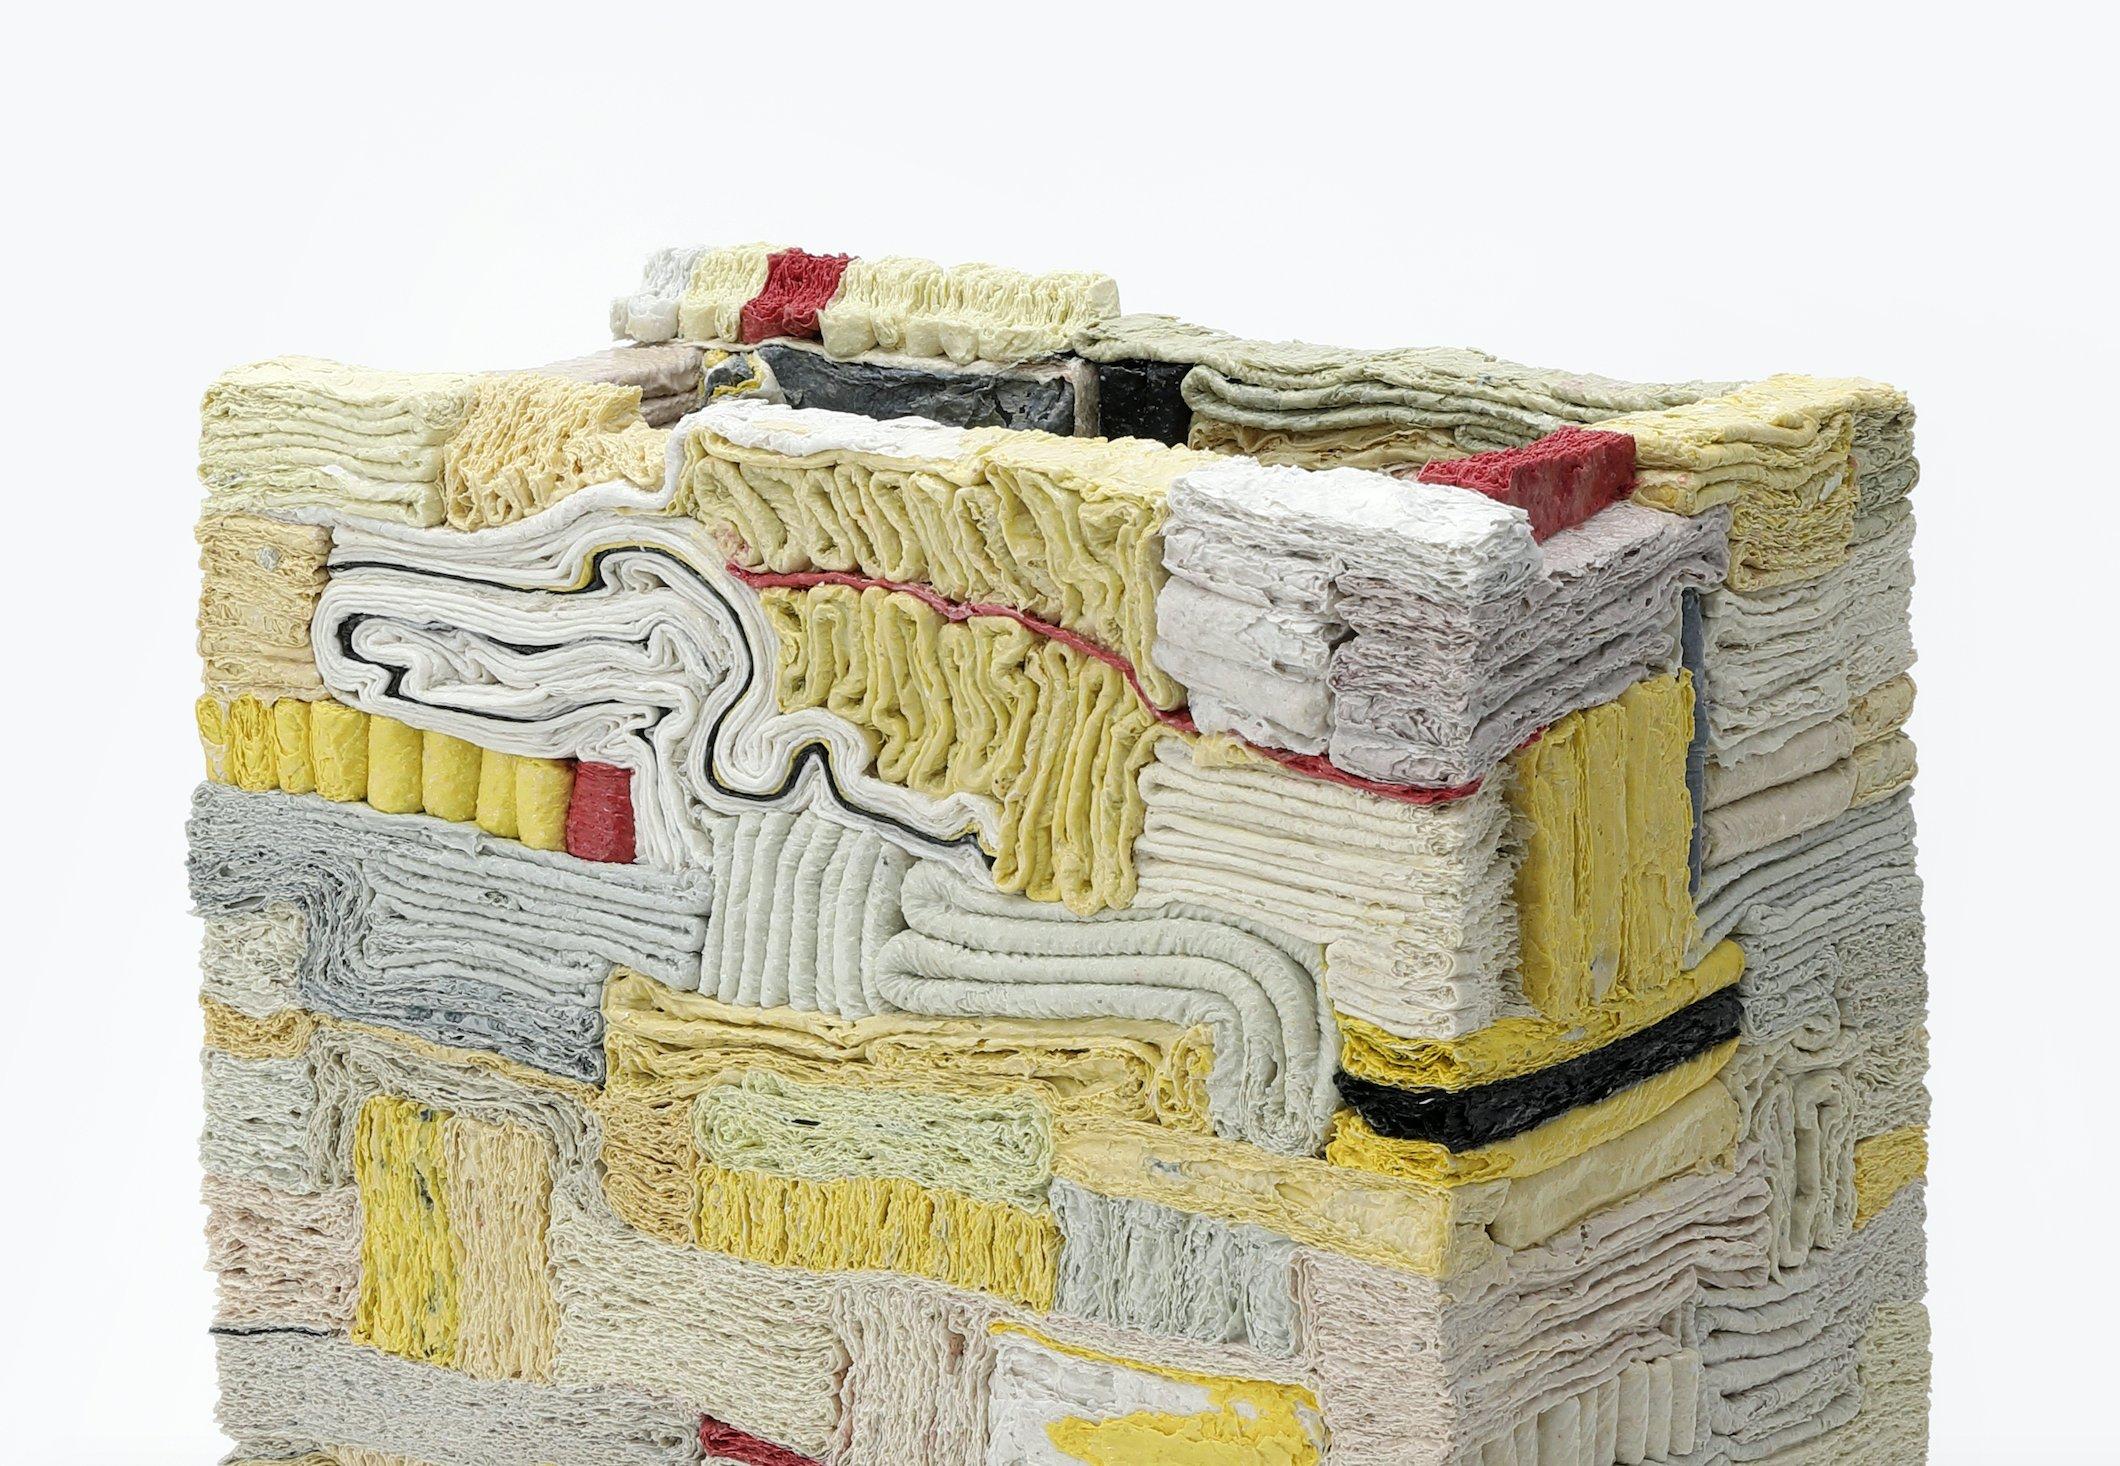 Yellow Patchwork, 2023 (Ceramic, C. 11.7 in. h x 10.2 in. w x 6.2 in. d, Object No.: 4202)

Jongjin Park was born in South Korea in 1982 and lives and works in Seoul. He holds an MA in Ceramics from Cardiff University in the UK and is the recipient